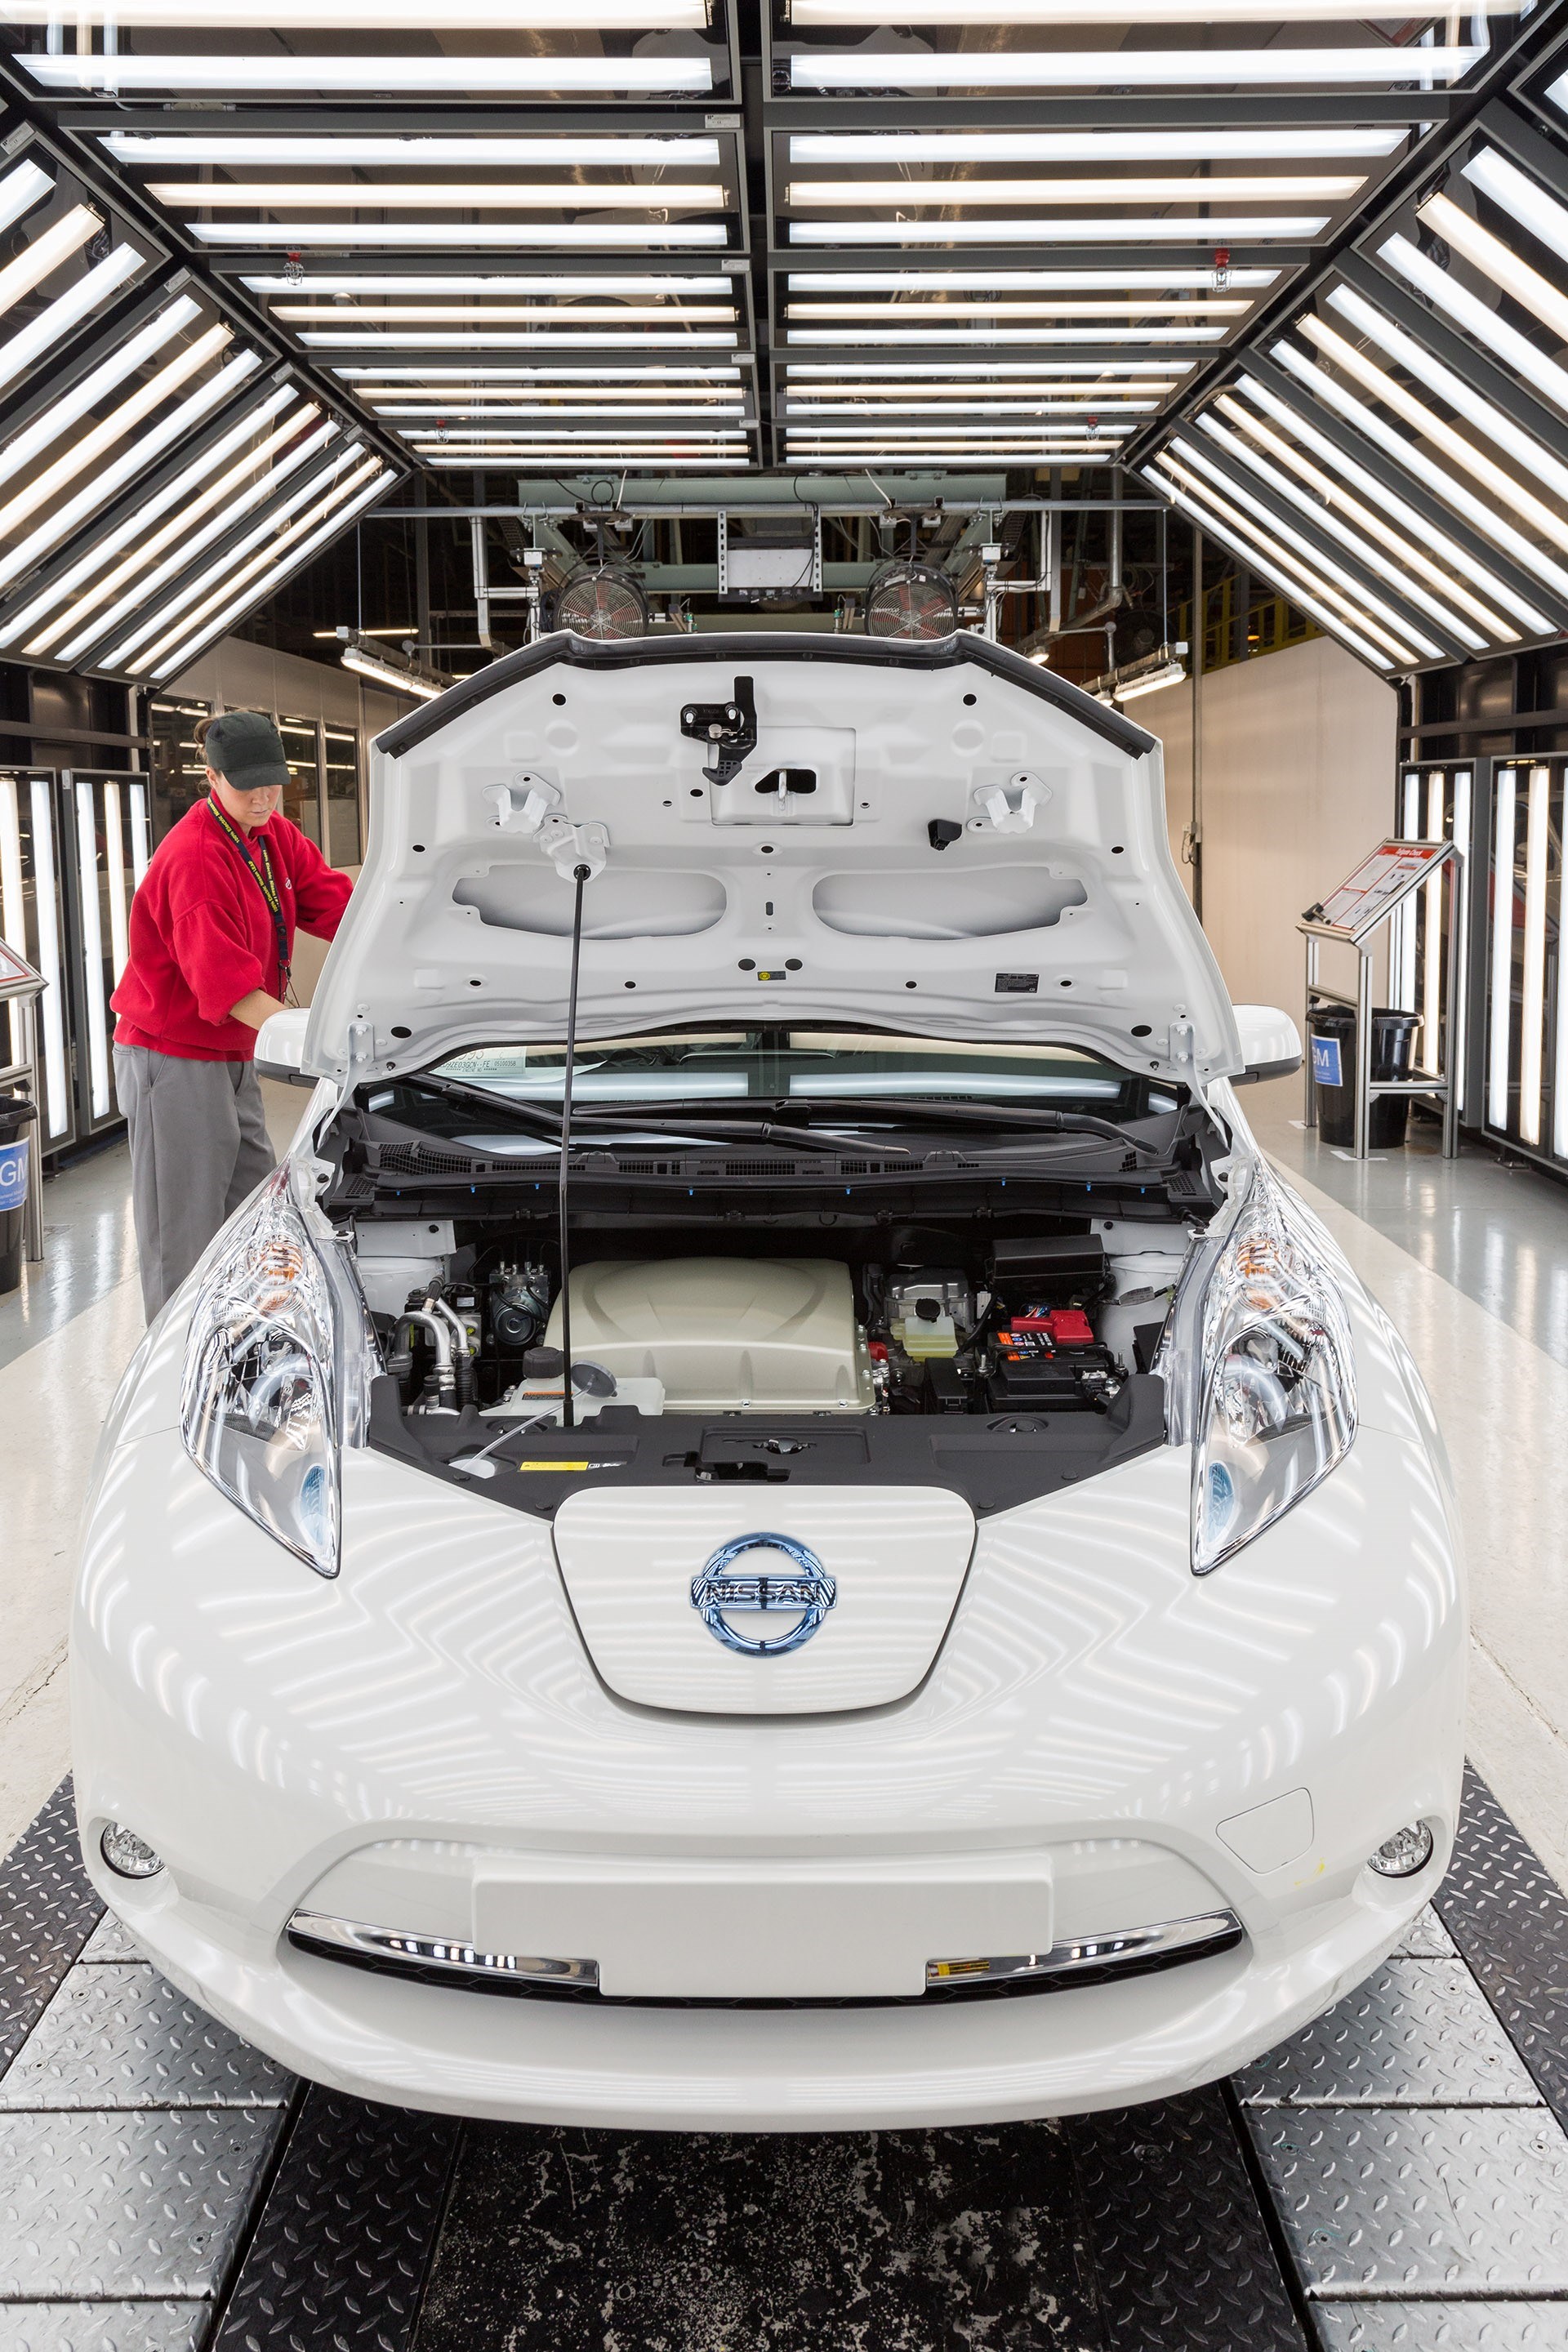 Nissan Leaf in Production Facility